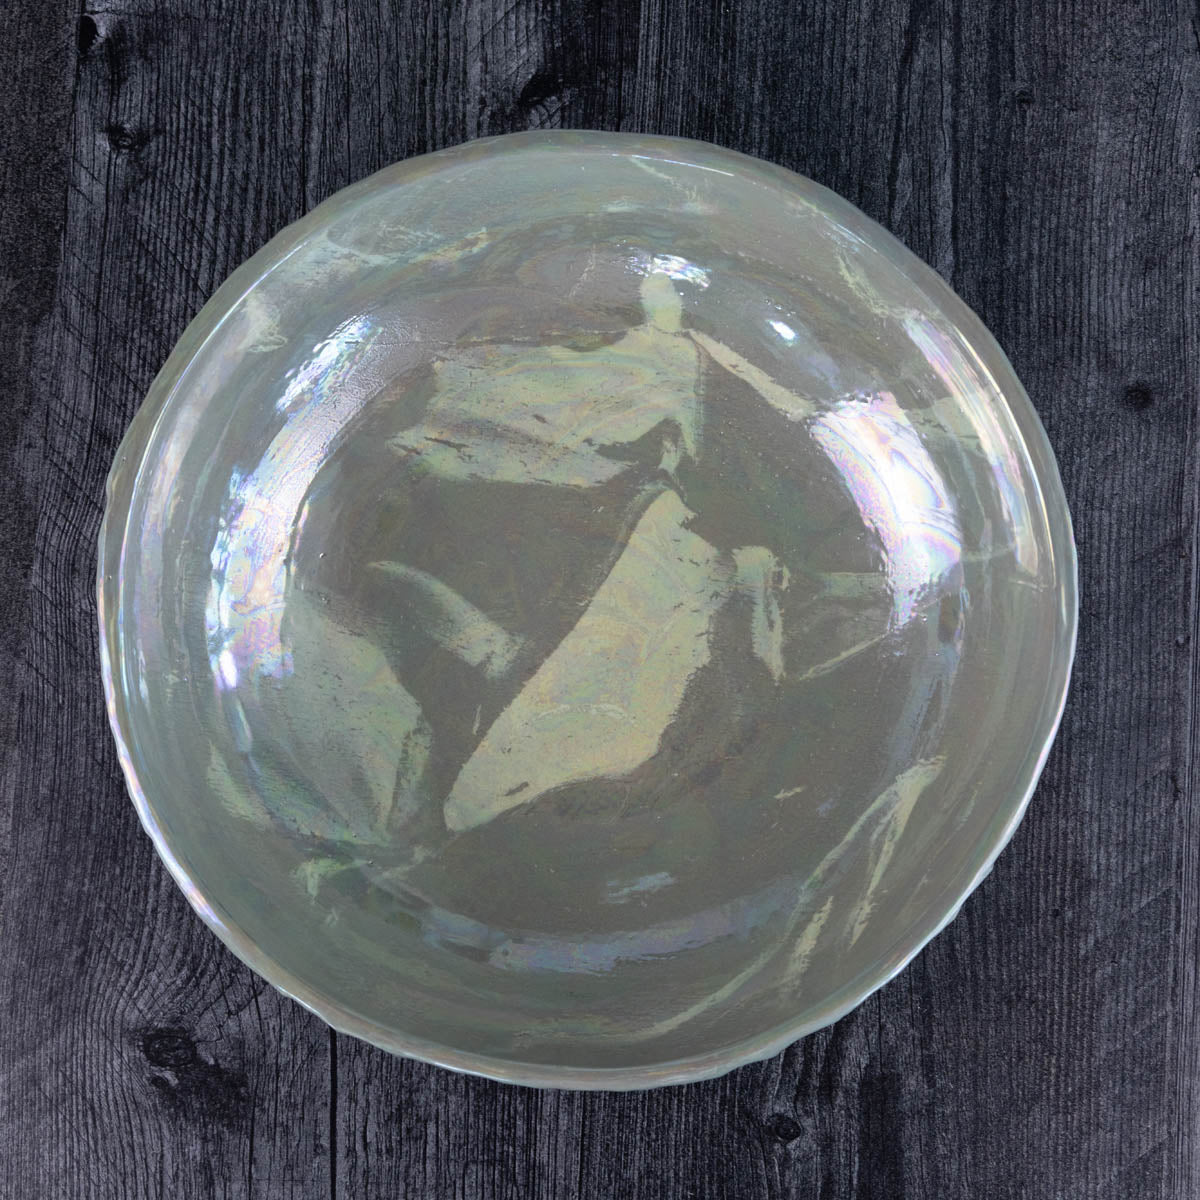 Large Nerikomi Stoneware "Mother of Pearl" Serving/Decorative Bowl - Greens & Creams (Alchemy Collection)